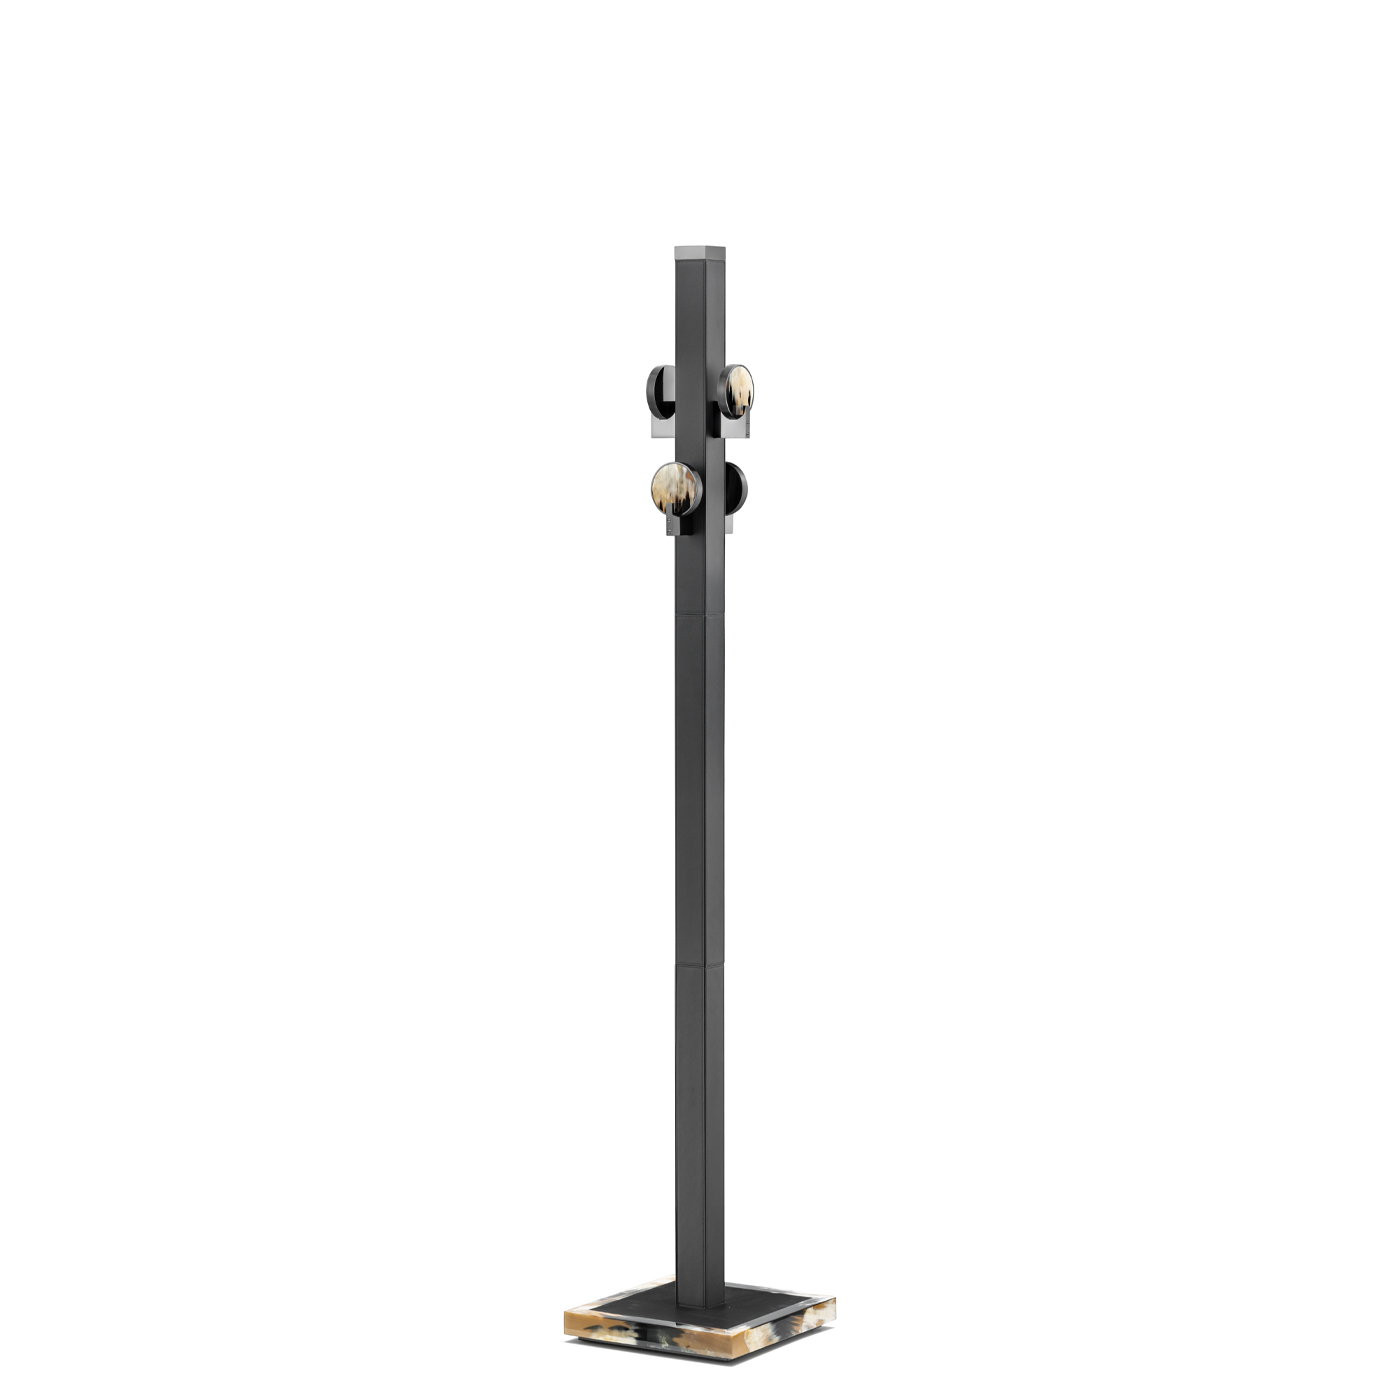 Coat stands and complementary furniture - Linosa coat stand in leather and horn - Arcahorn